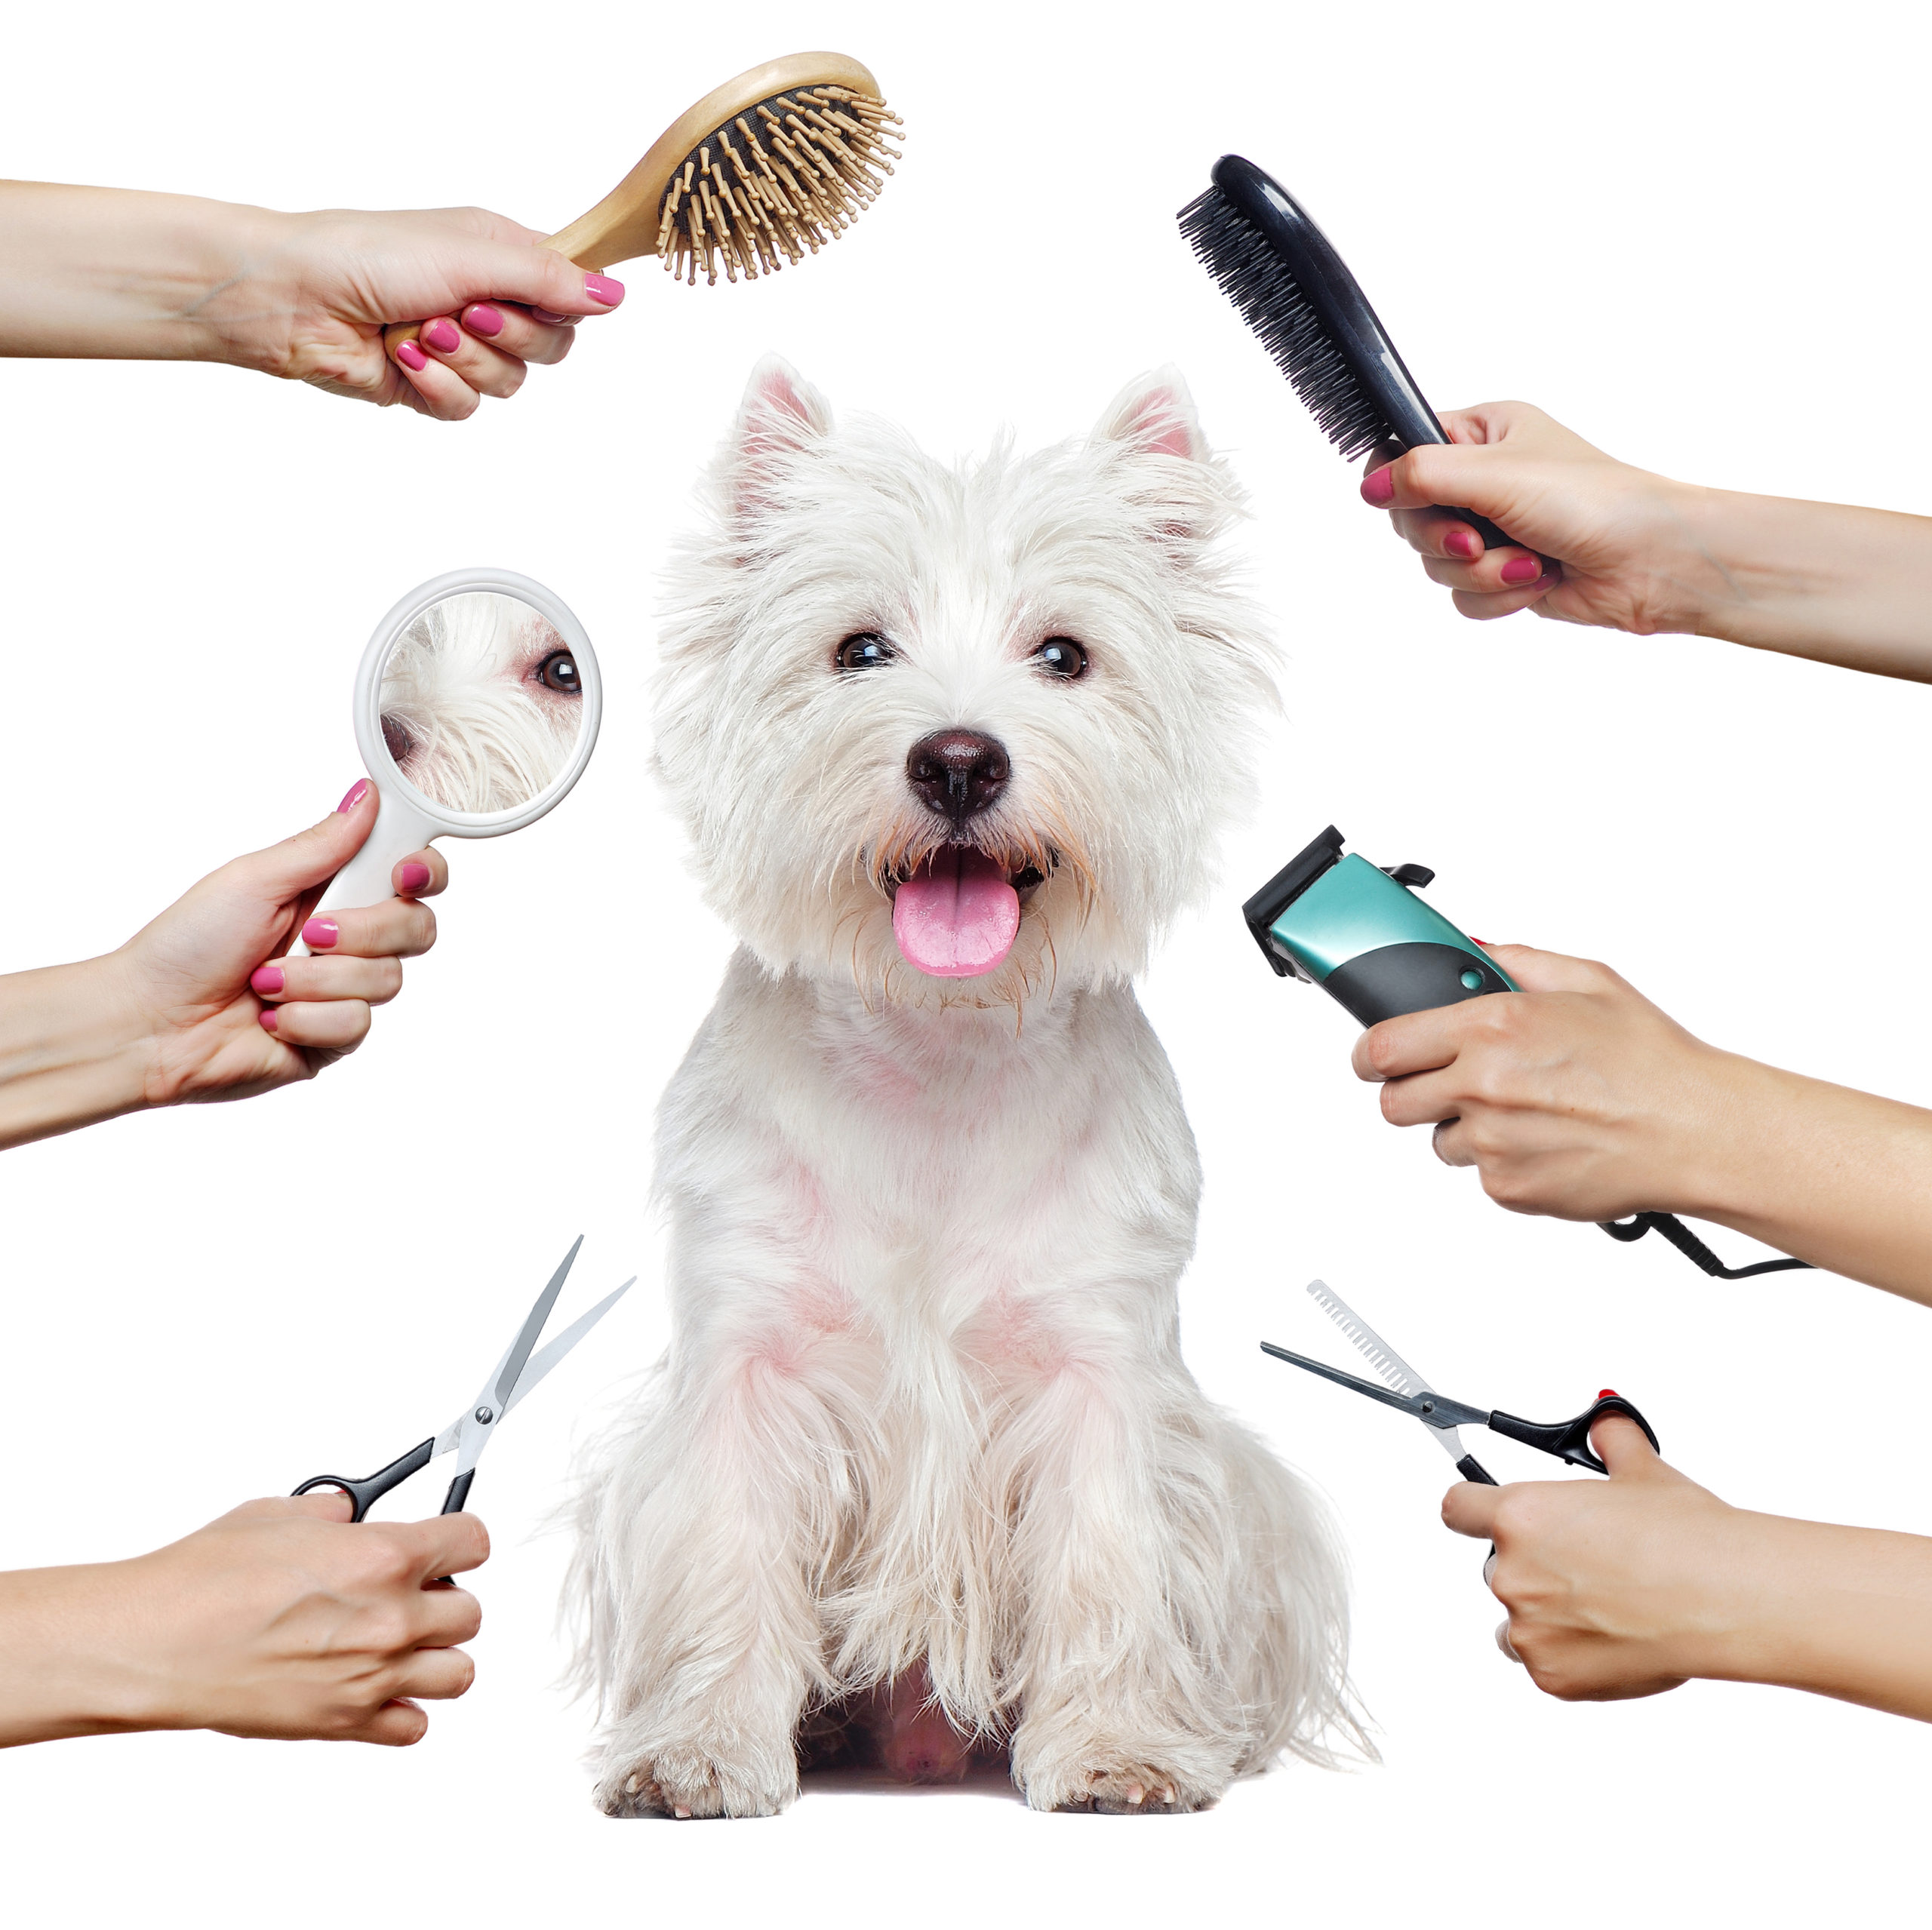 5 Tips to Relax Your Dog before Grooming - PawHootz Pet Resort